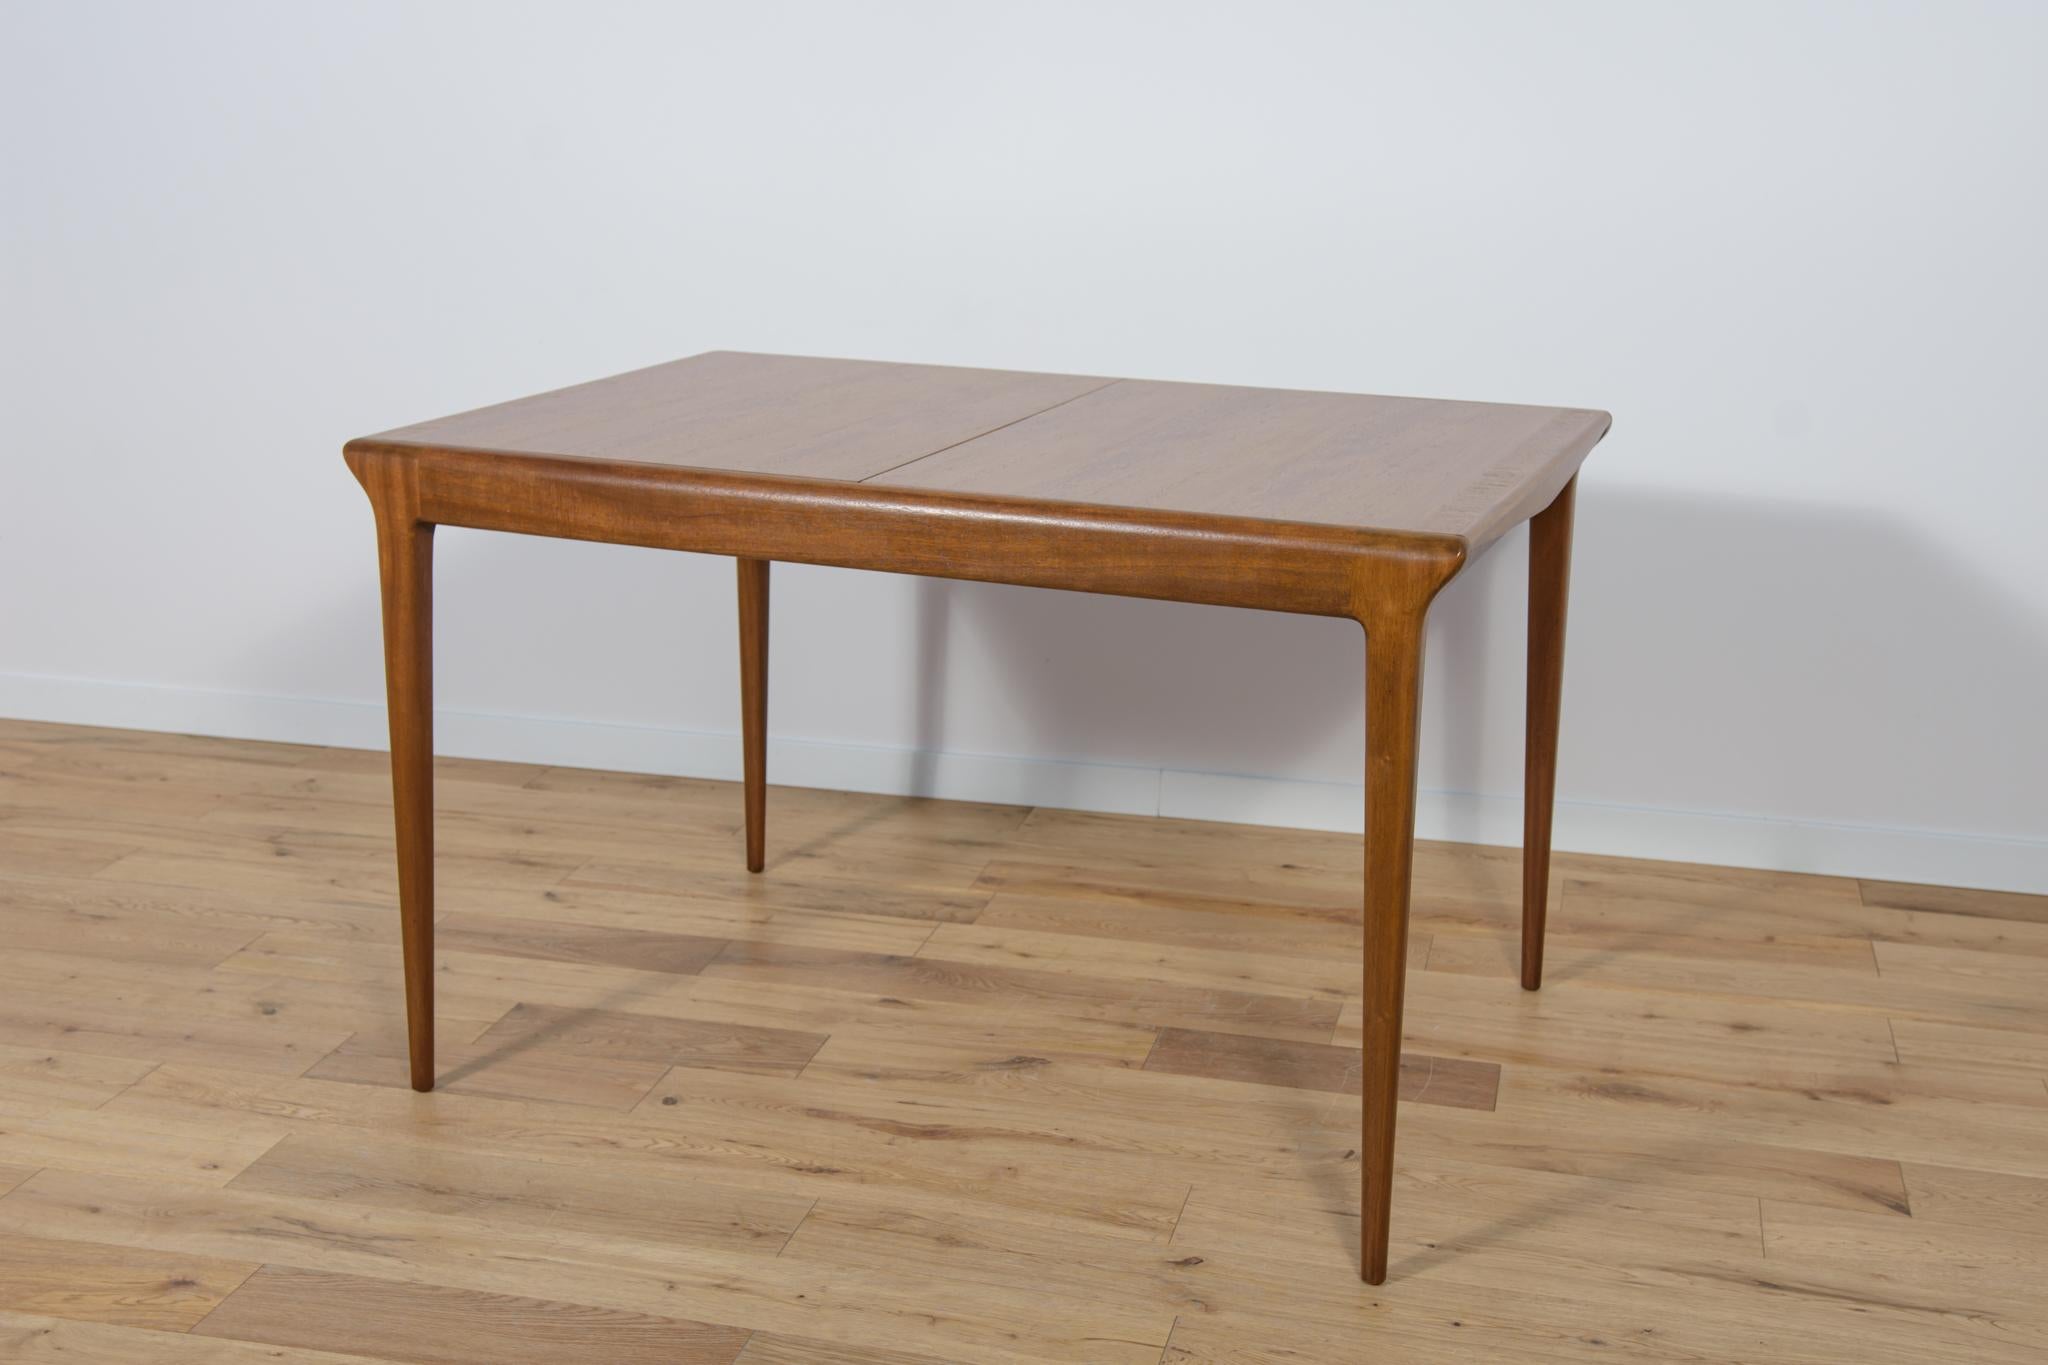 British Mid-Century Teak Extendable Dining Table from McIntosh, 1960s For Sale